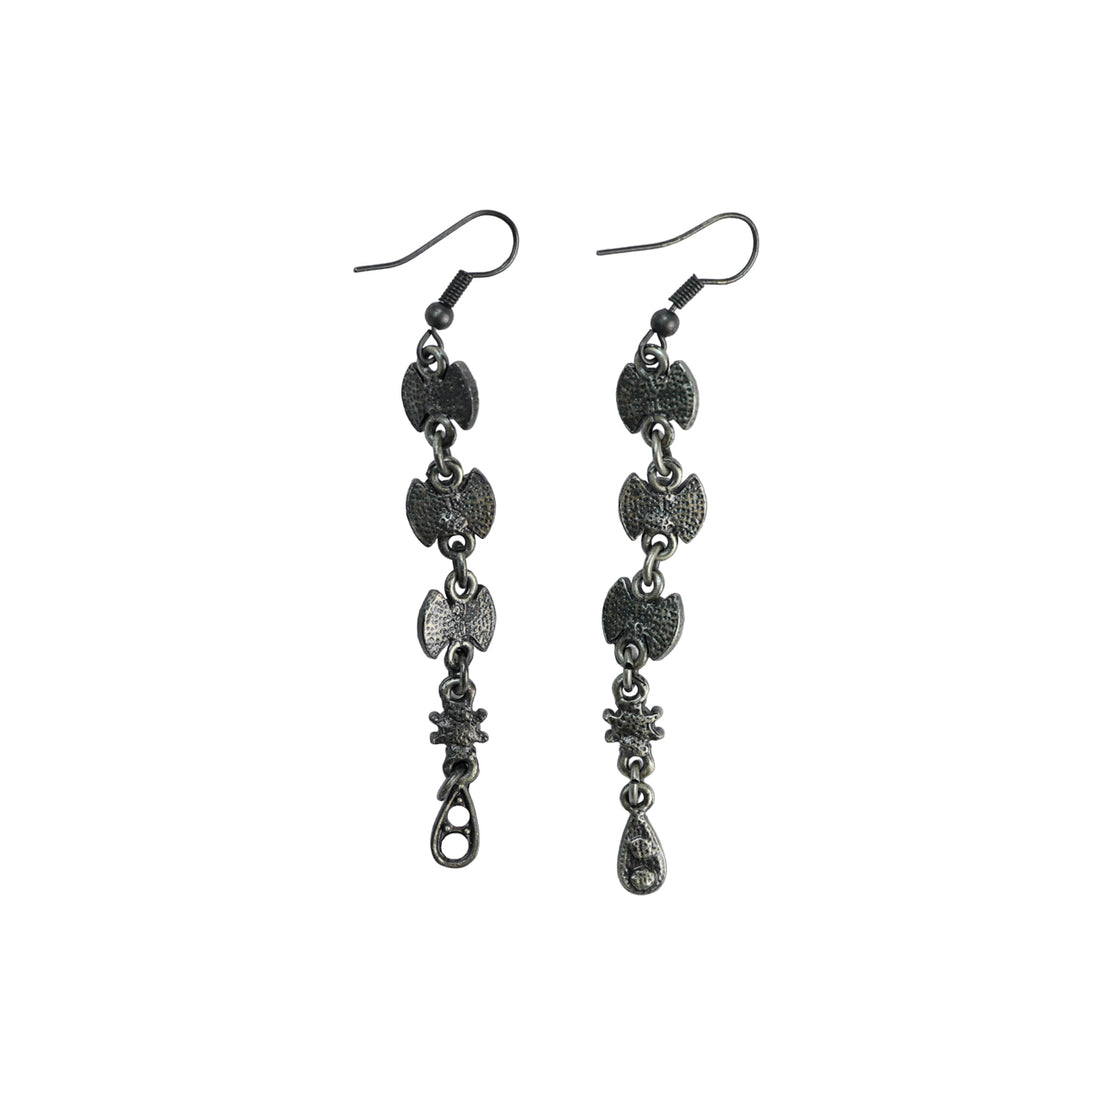 NN earrings with vintage-style crystals